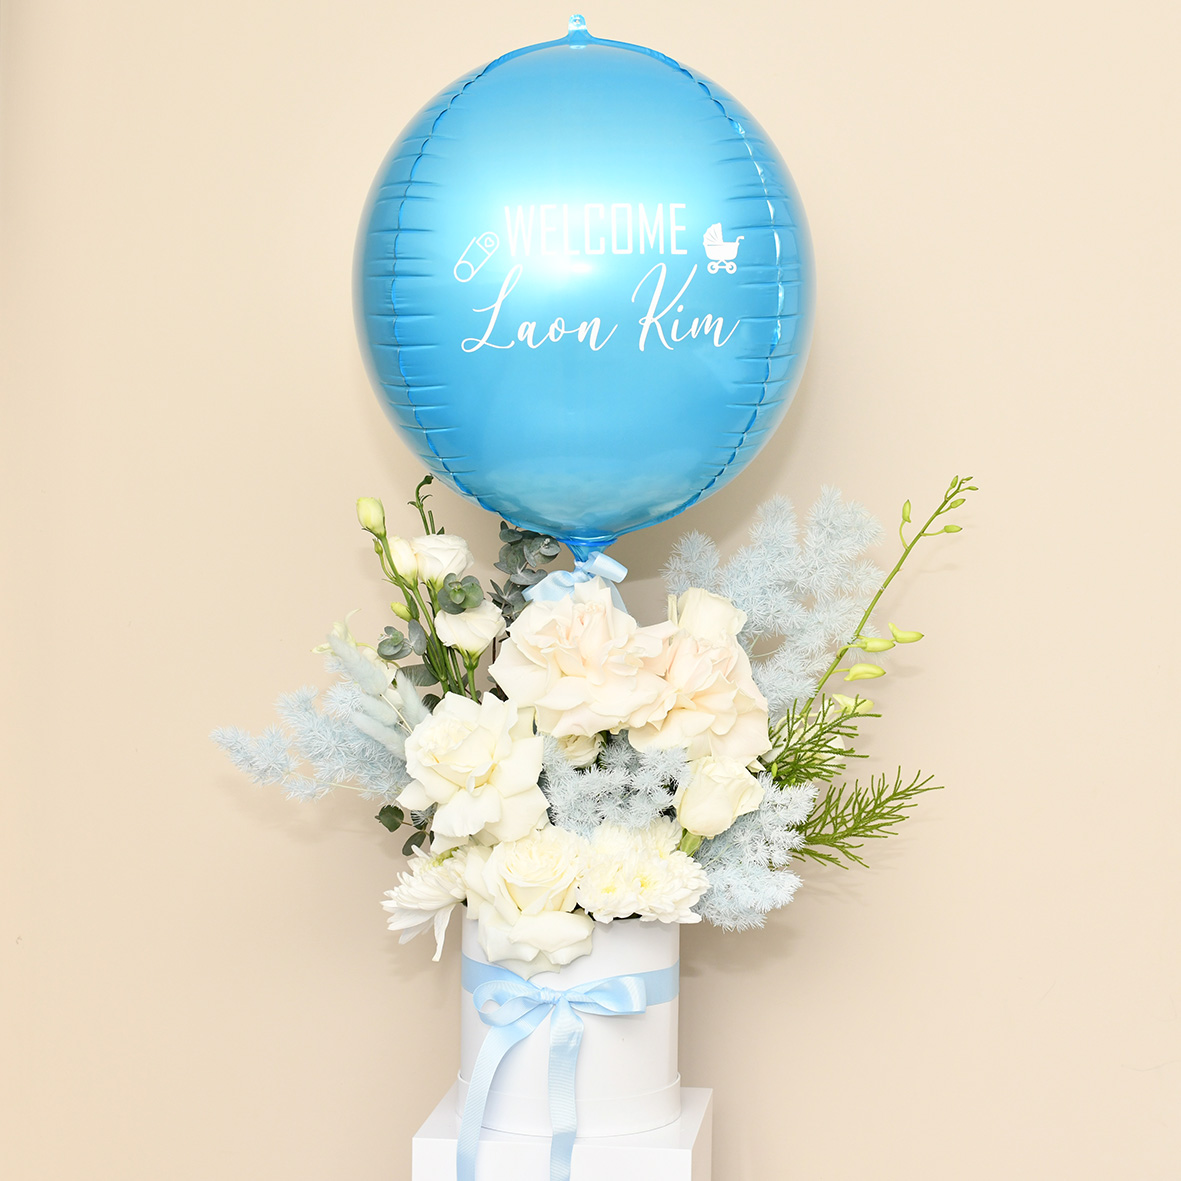 Personalised New Baby Flowers and Balloons Sydney Delivery 